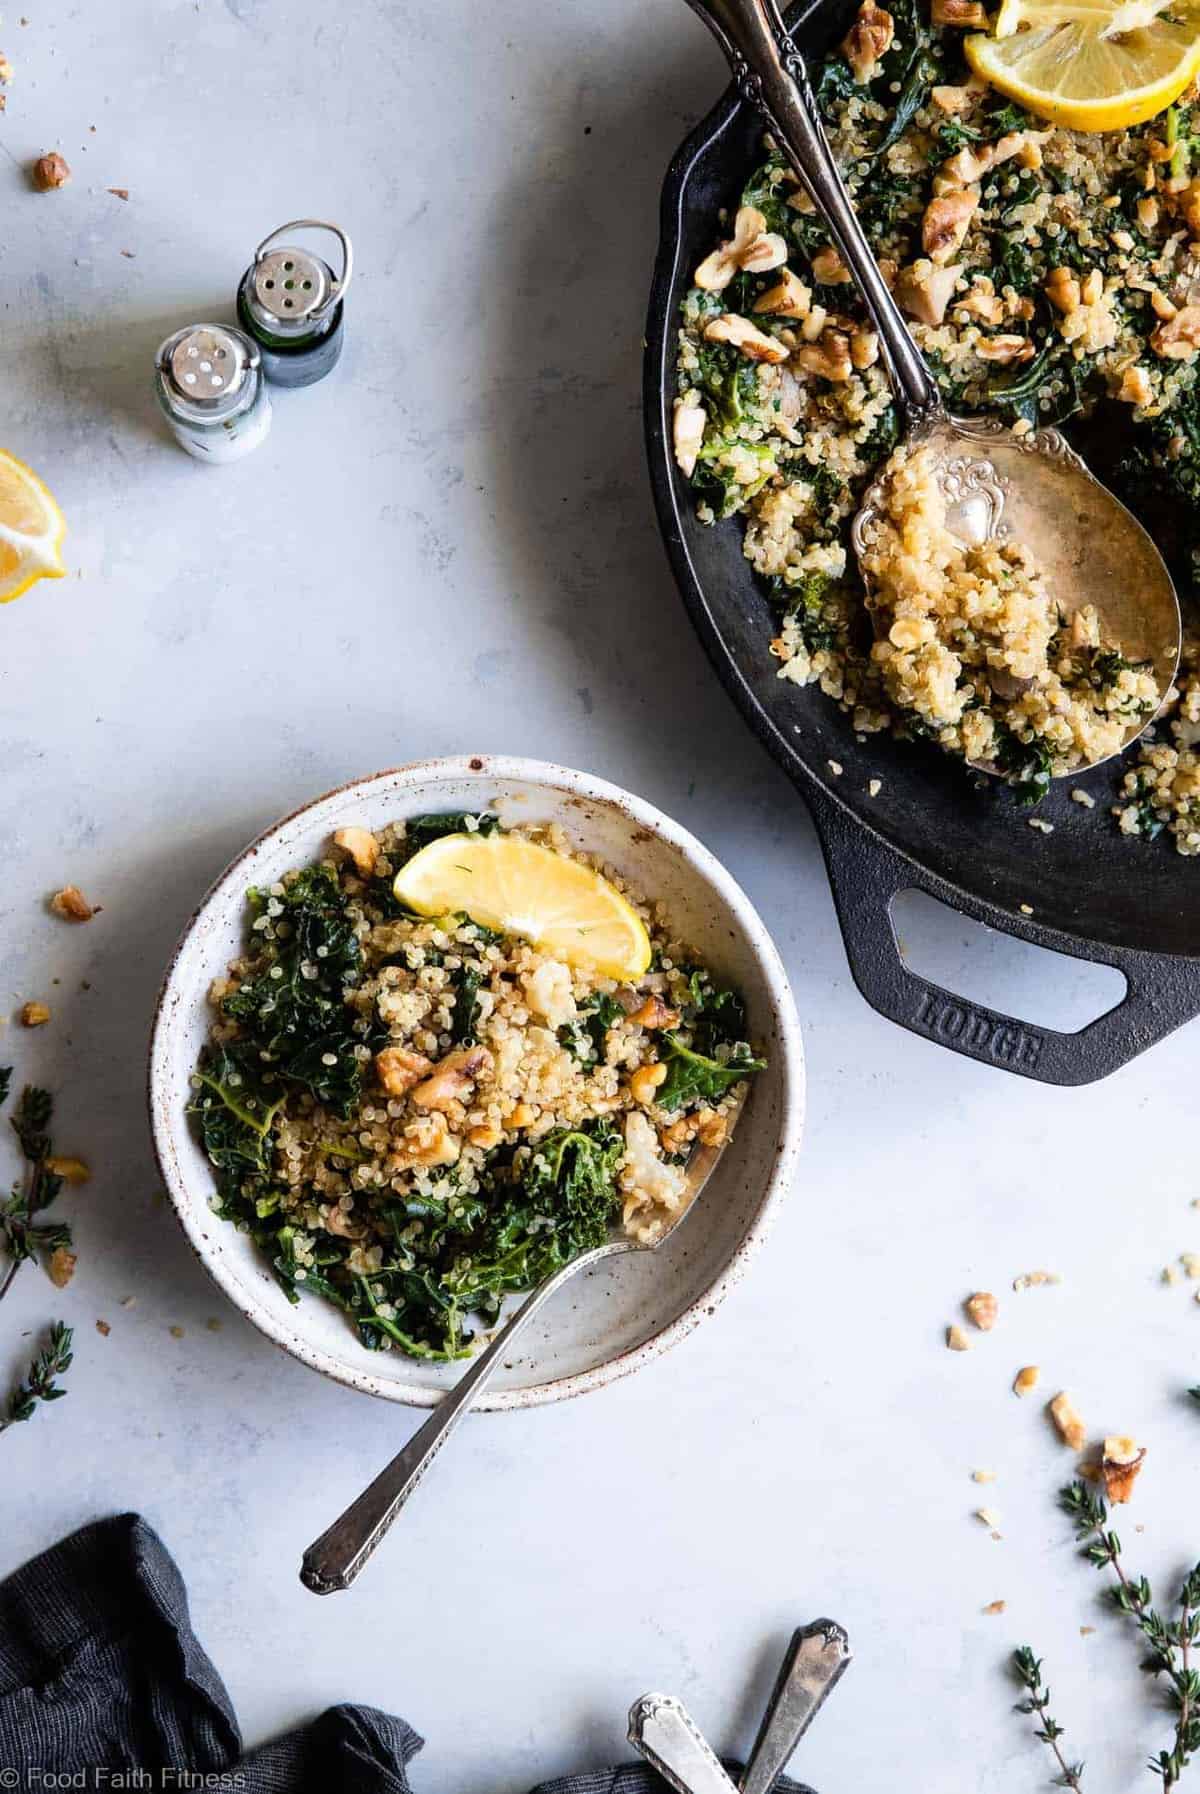 Kale Quinoa and Mushroom Skillet with Garlic Herb Butter - This skillet is made in one pan and is SO easy and full of flavour. It's a healthy, meatless dinner that your whole family will love! Great for meal prep too! | #Foodfaithfitness | #Glutenfree #Vegetarian #Healthy #Meatless #Dinner